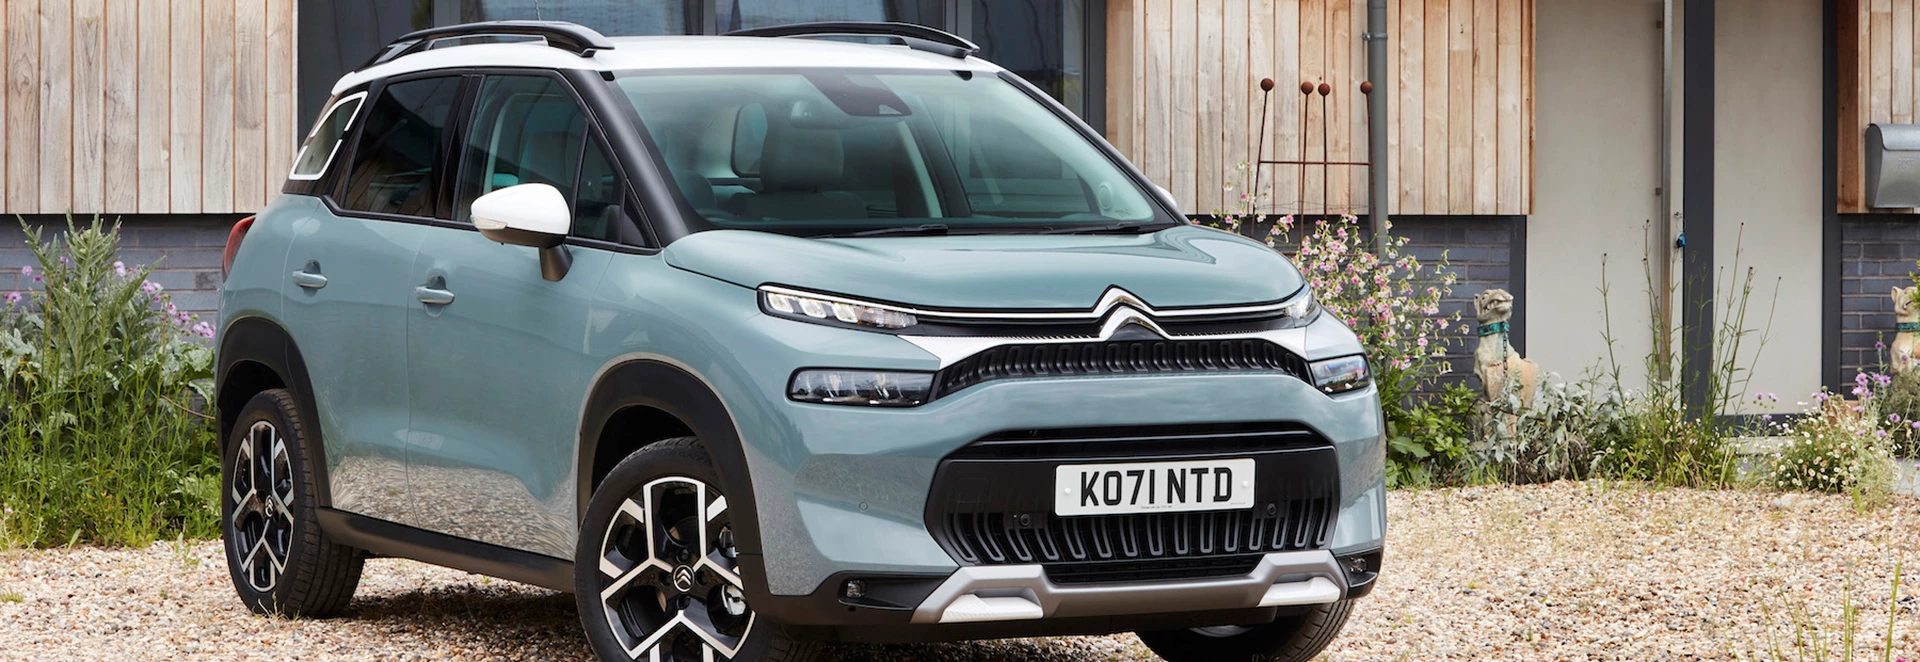 Buyer’s guide to the Citroen C3 Aircross 